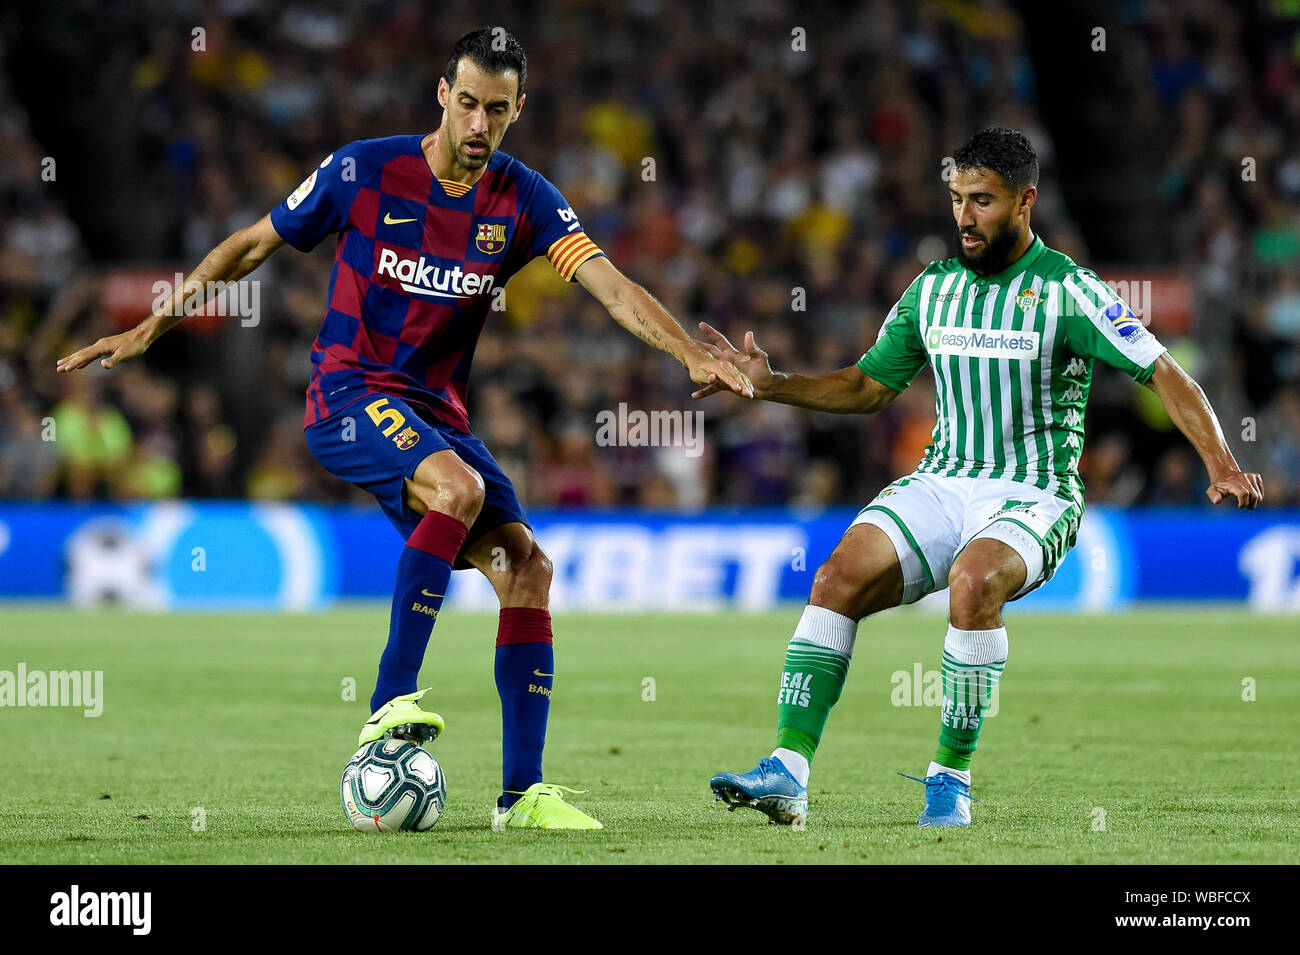 Barcelona, Spain. 26th Aug, 2019. BARCELONA, SPAIN - AUGUST 25: Sergio Busquets of FC Barcelona and Nabil Fekir of Real Betis during the La Liga match between FC Barcelona and Real Betis at Camp Nou on August 25 2019 in Barcelona, Spain. (Photo by David Ramirez/Pacific Press) Credit: Pacific Press Agency/Alamy Live News Stock Photo